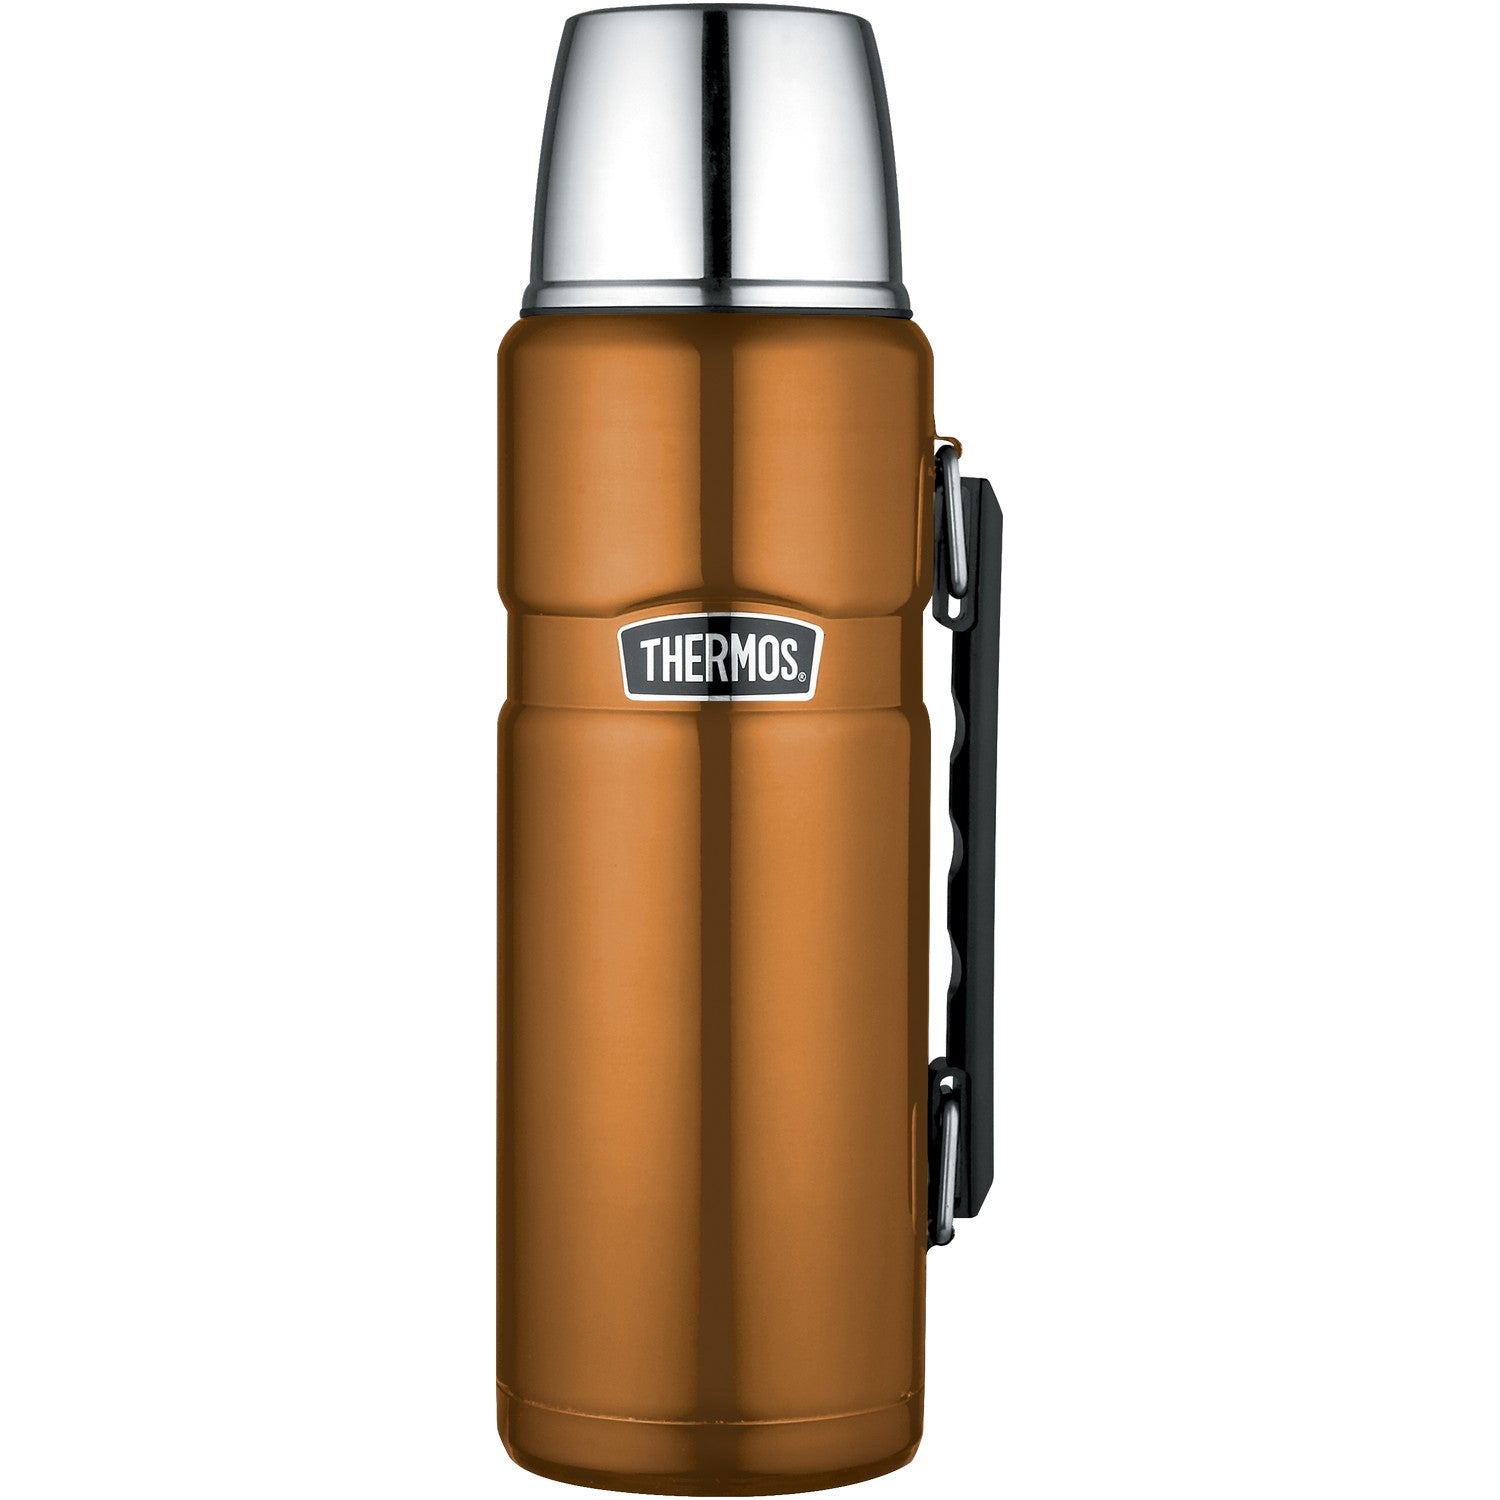 Thermos 1.2L Stainless Steel Copper Vacuum Flask with Handle